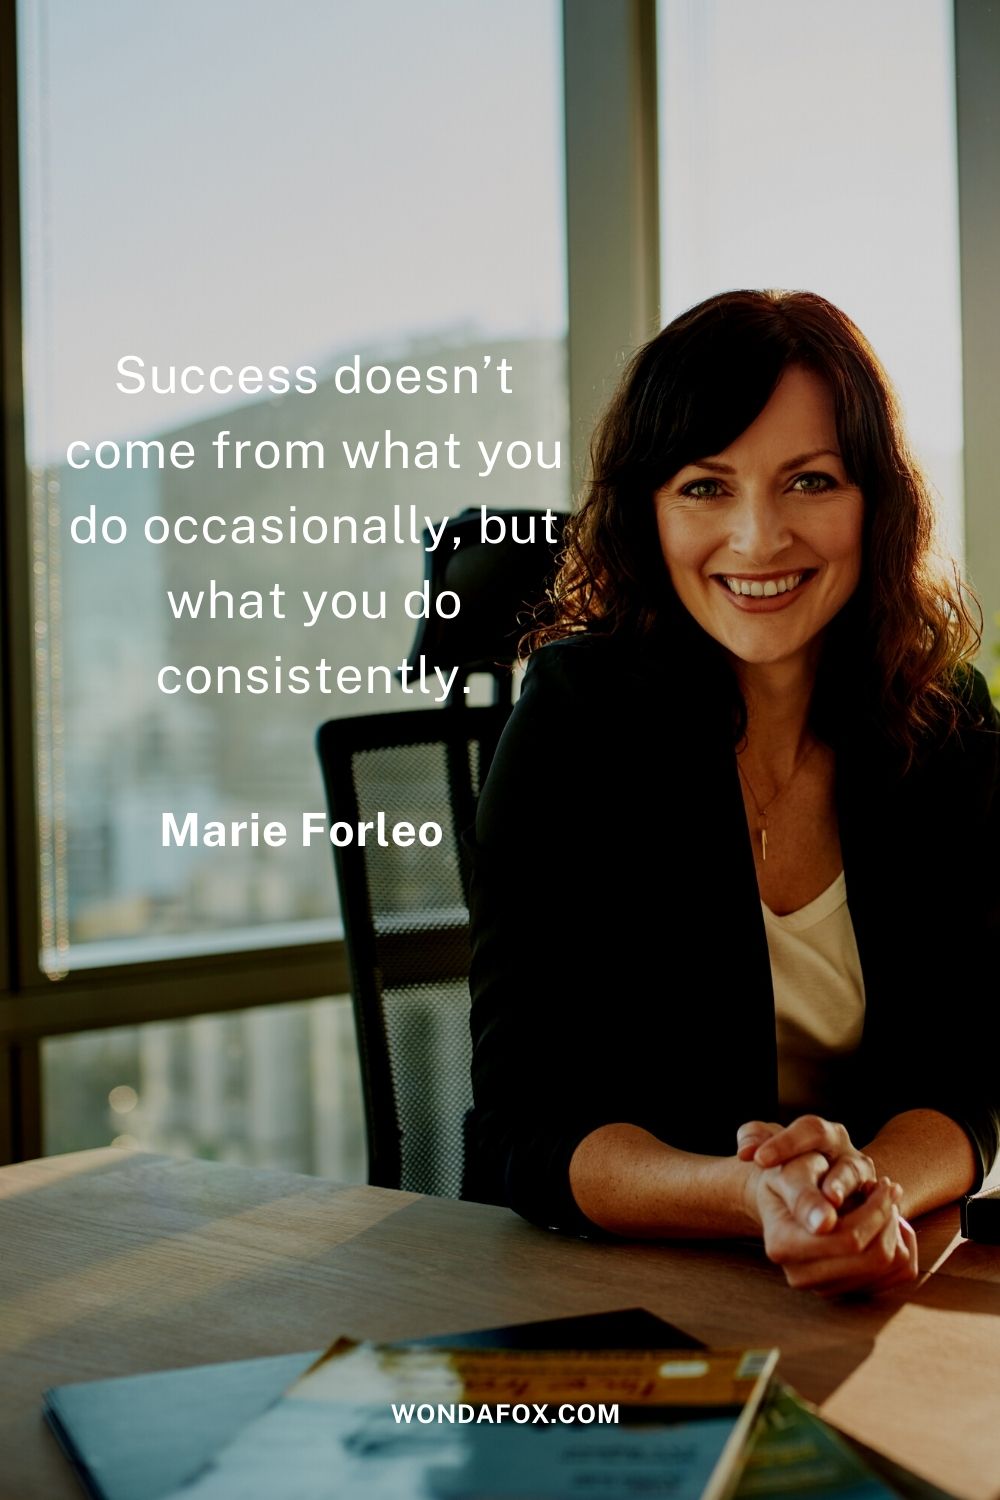 Success doesn’t come from what you do occasionally, but what you do consistently.